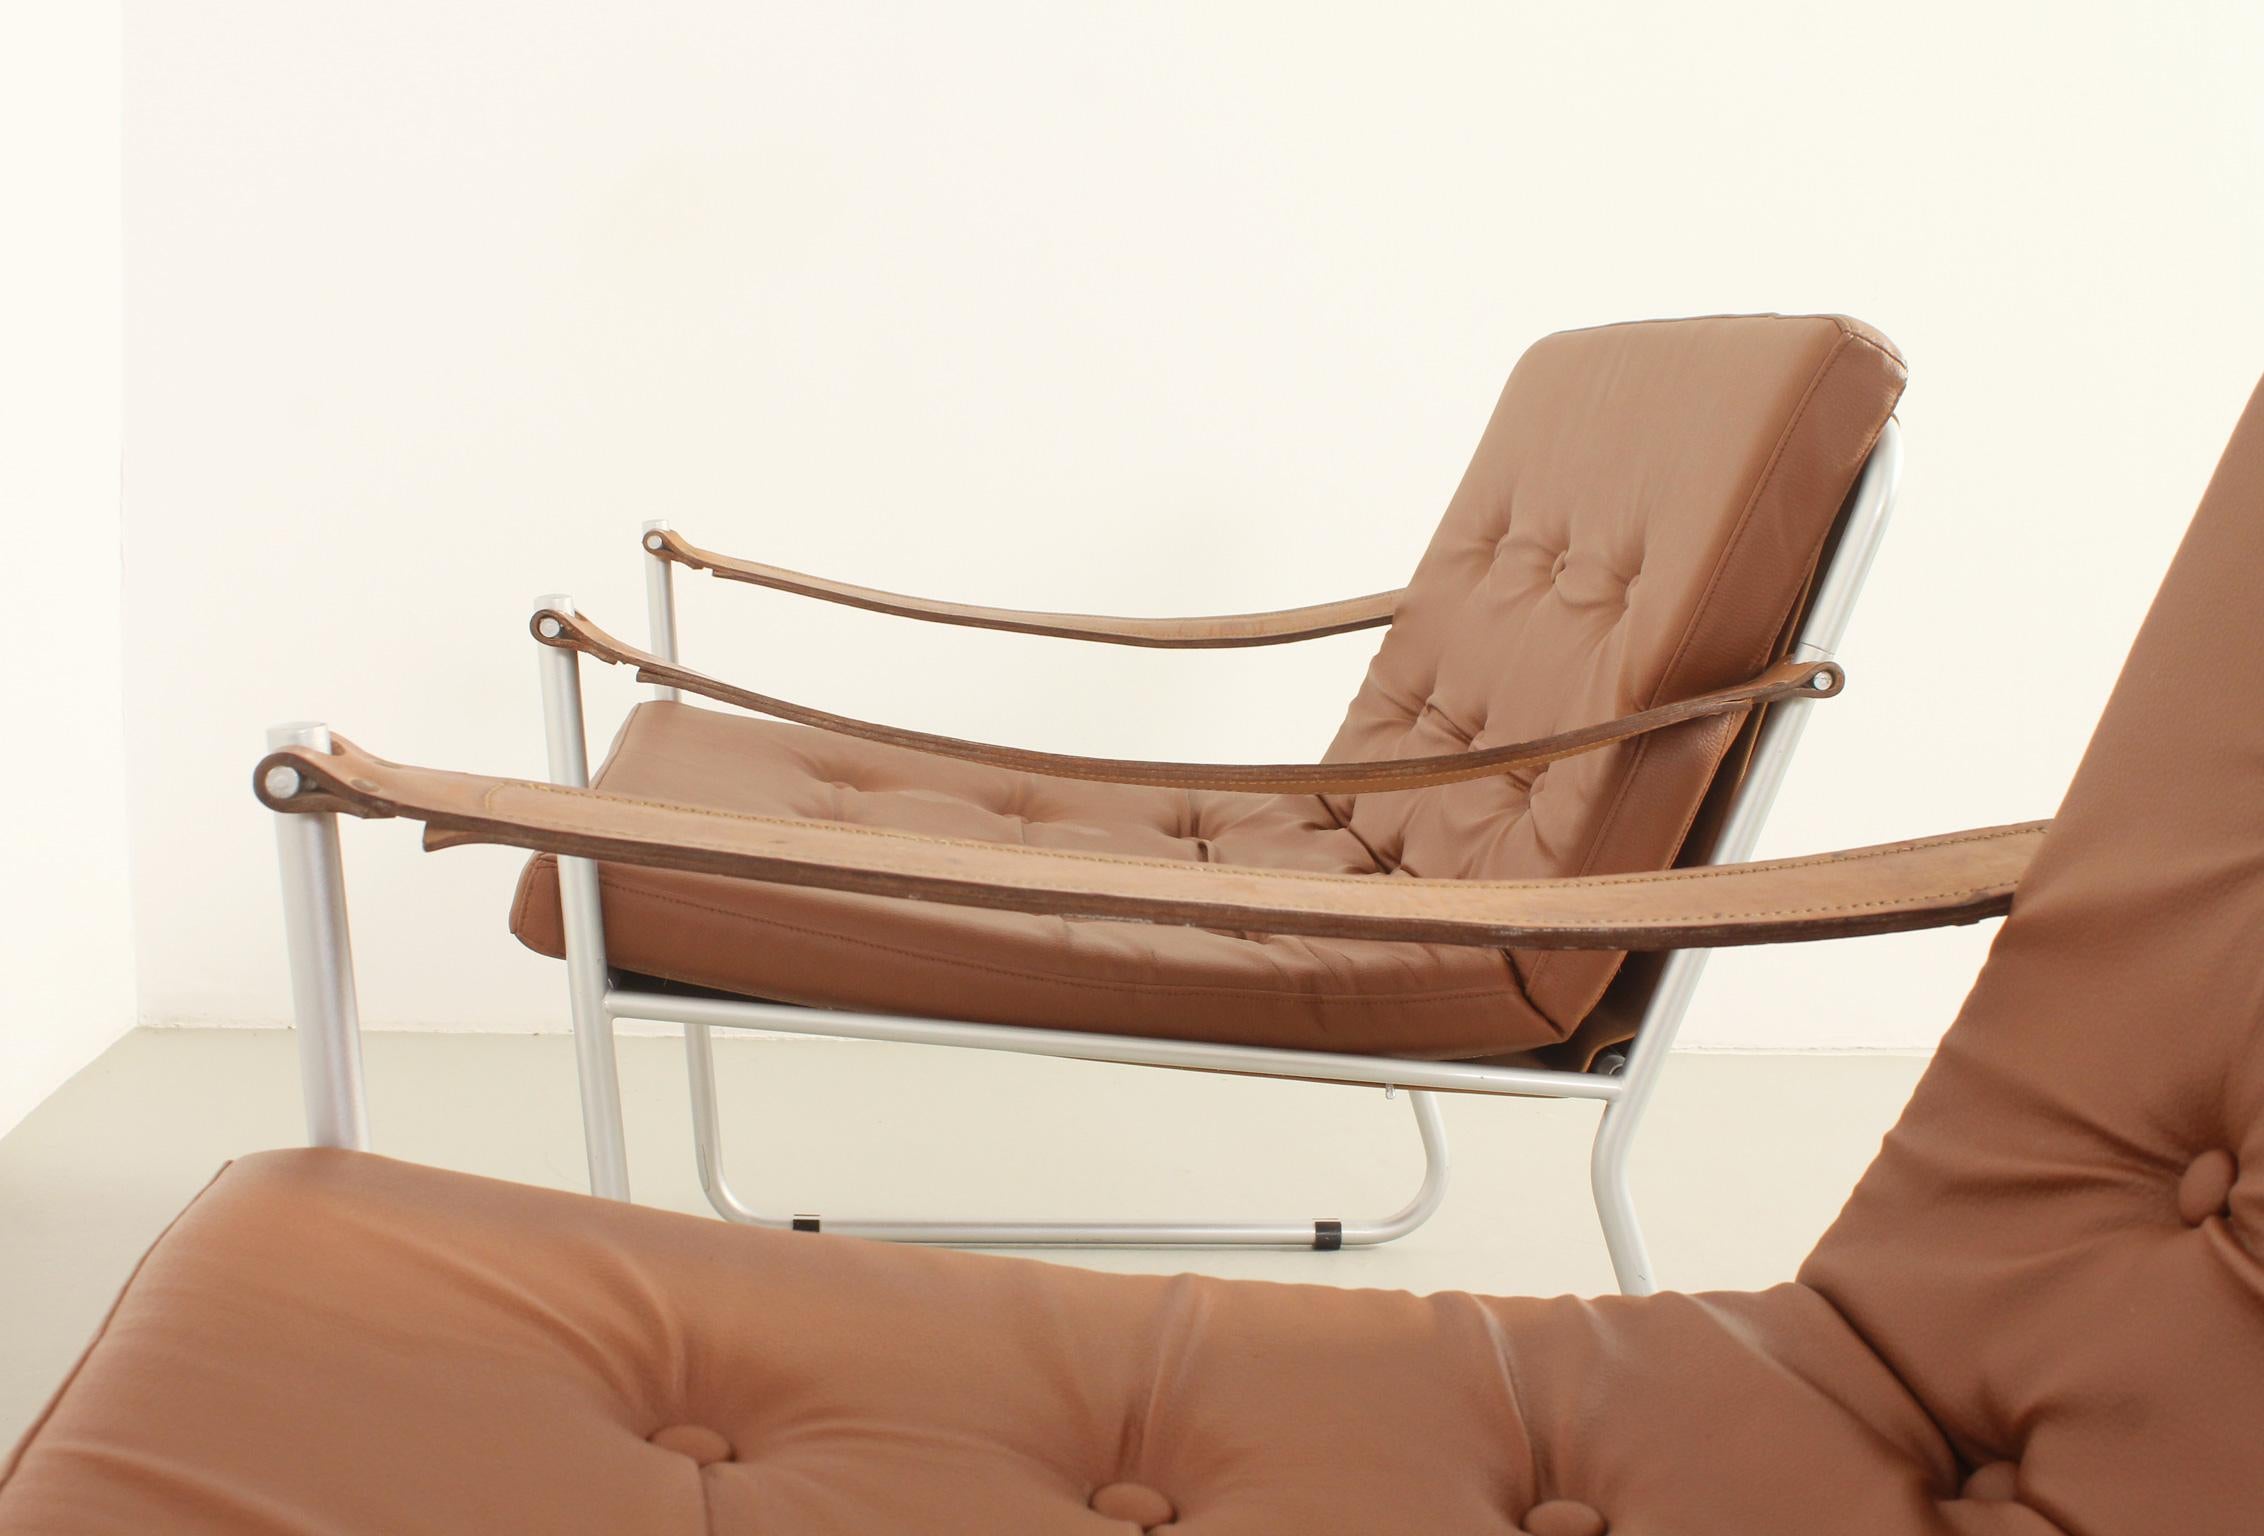 Pair of Safari Style Armchairs with Leather Straps Arm Rests, 1960's For Sale 1